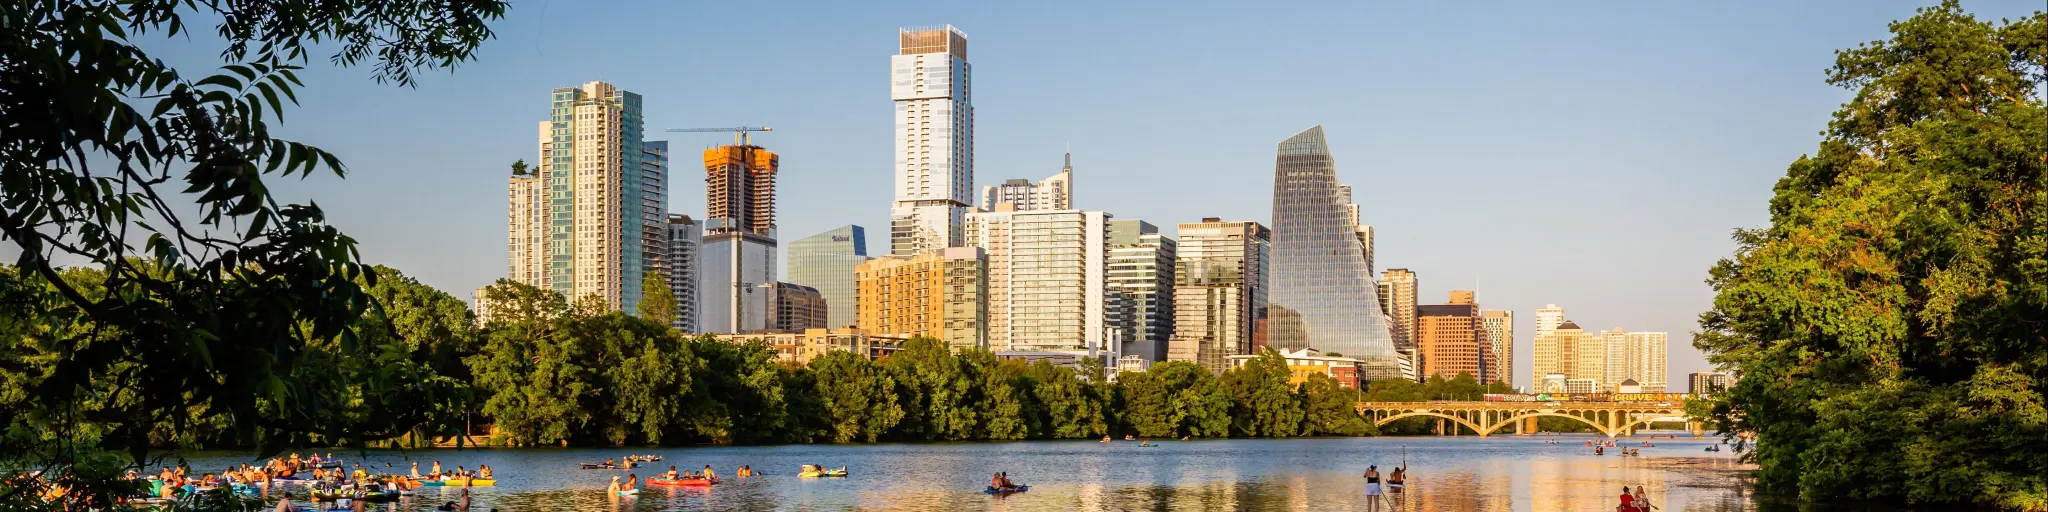 Austin skyline on a clear day and its reflection on Lady Bird Lake, dotted with boaters